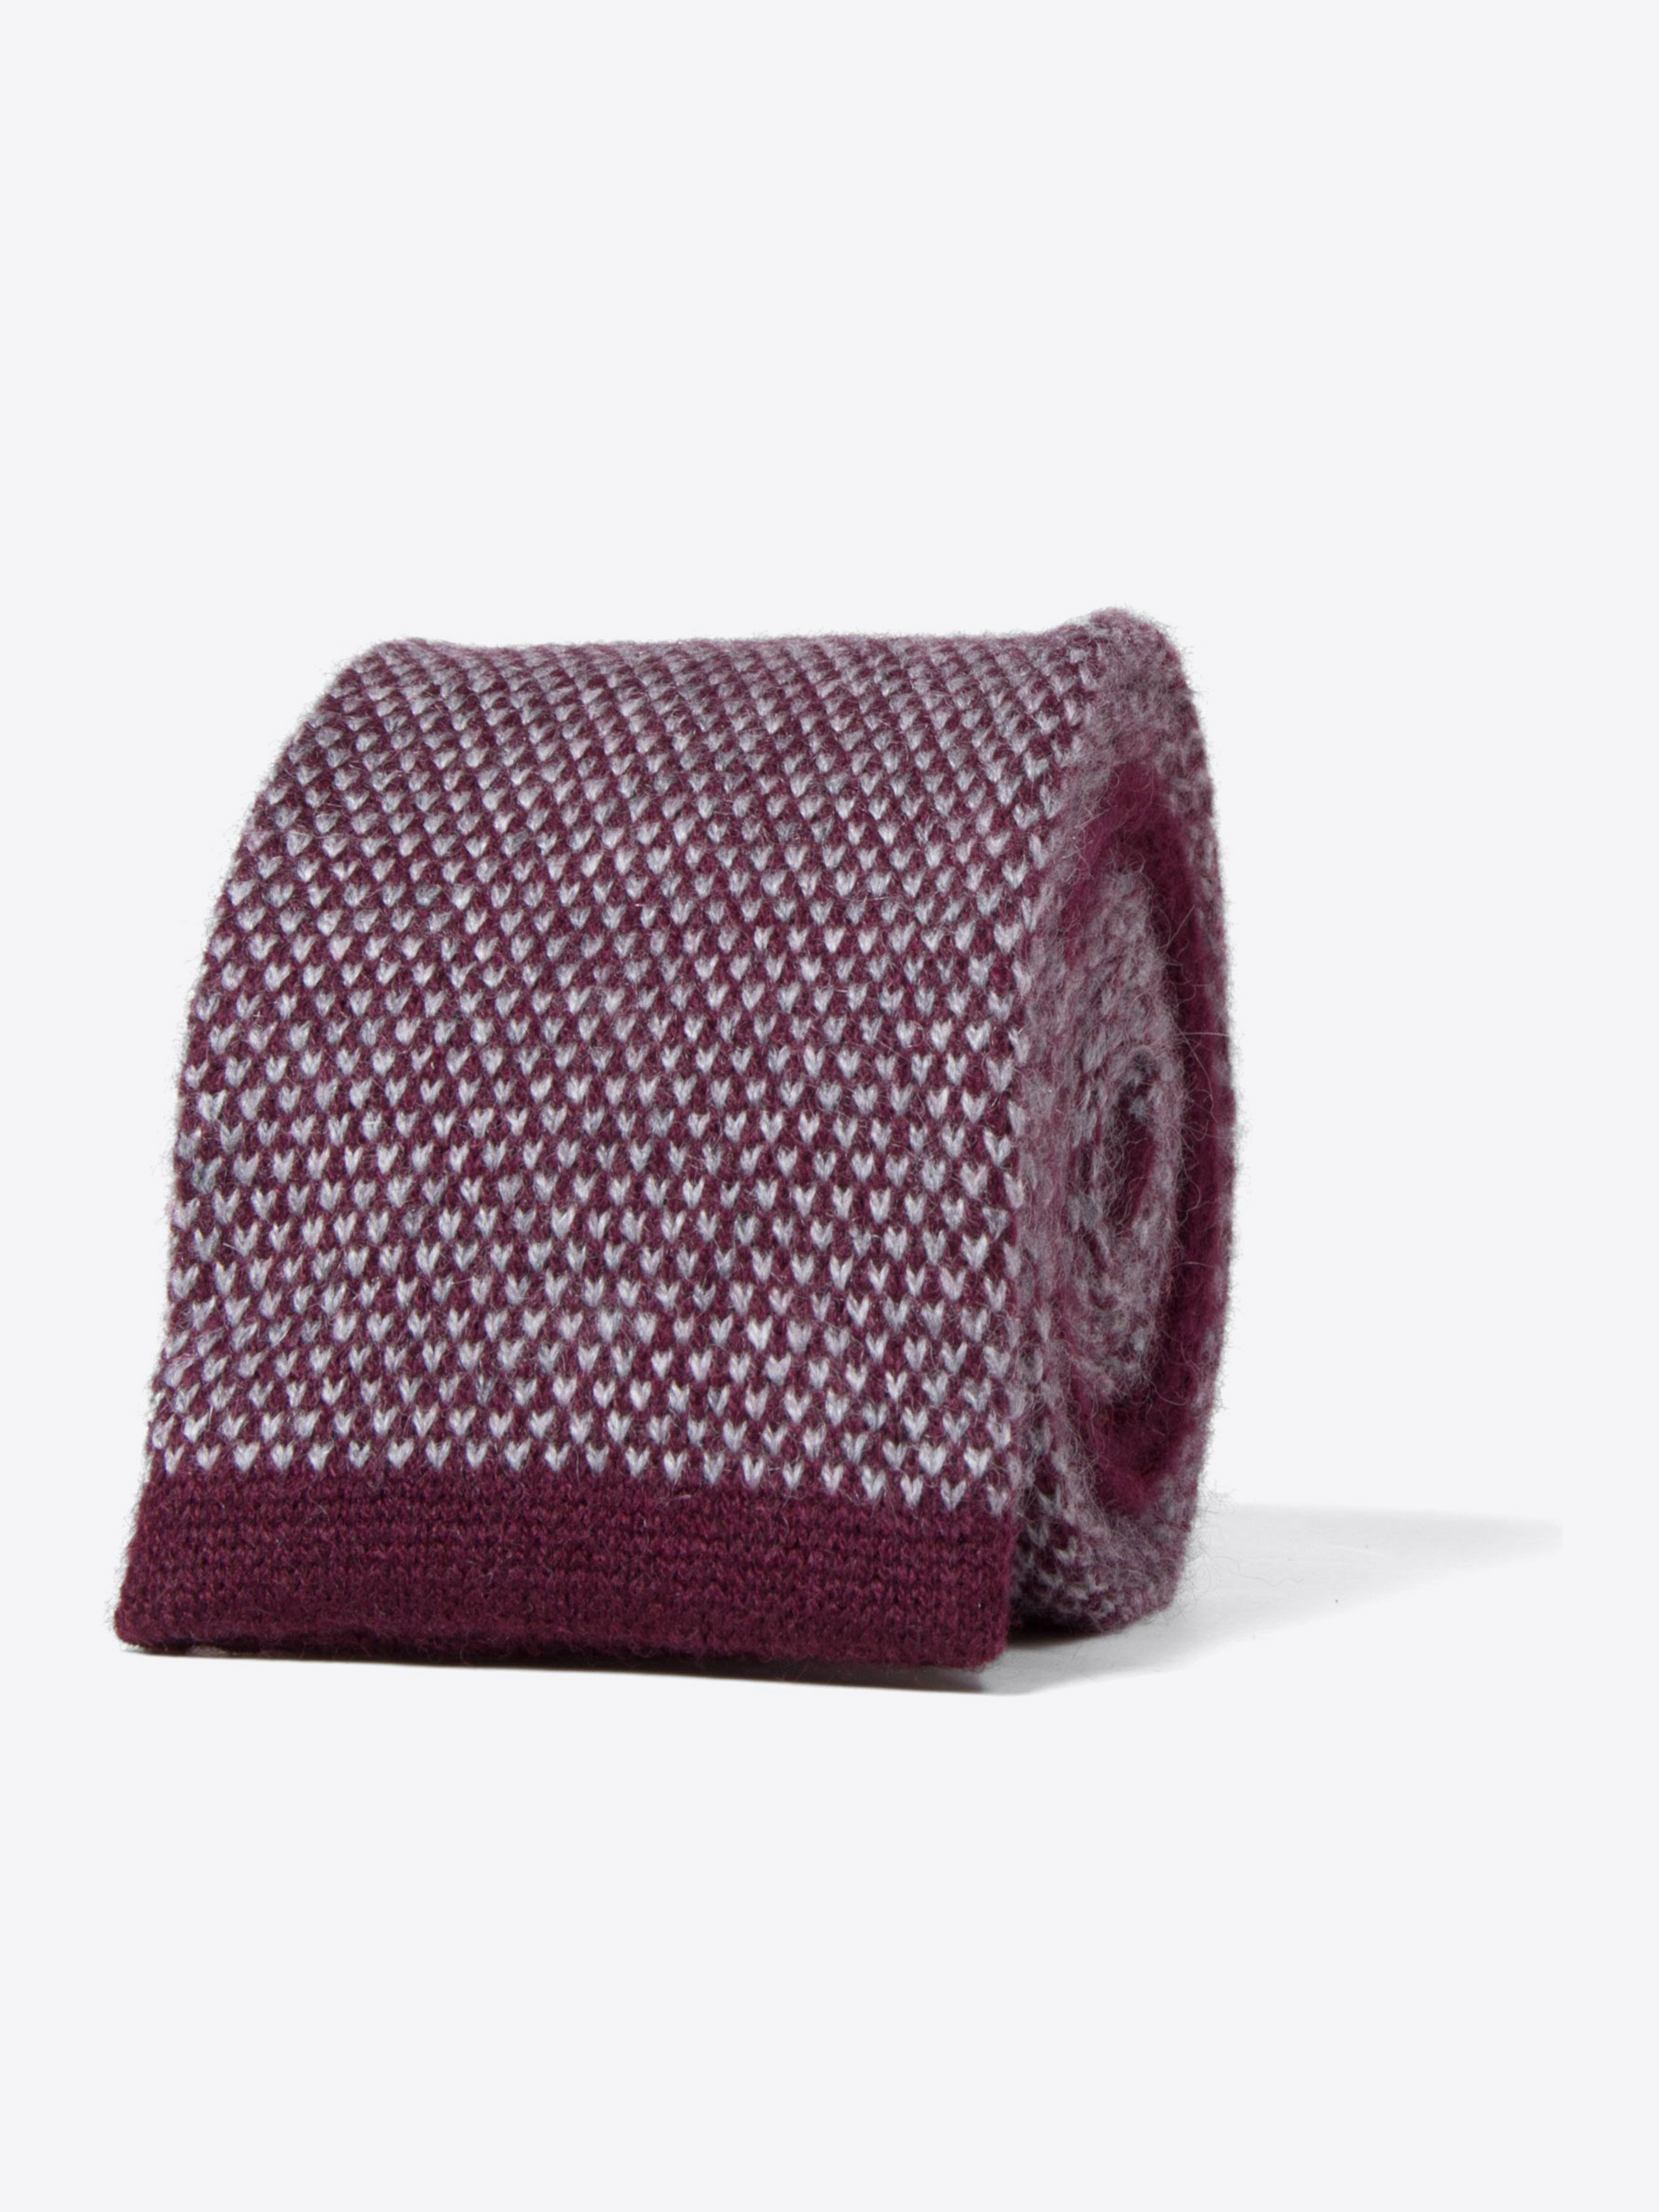 Zoom Image of Torino Red Cashmere Knit Tie